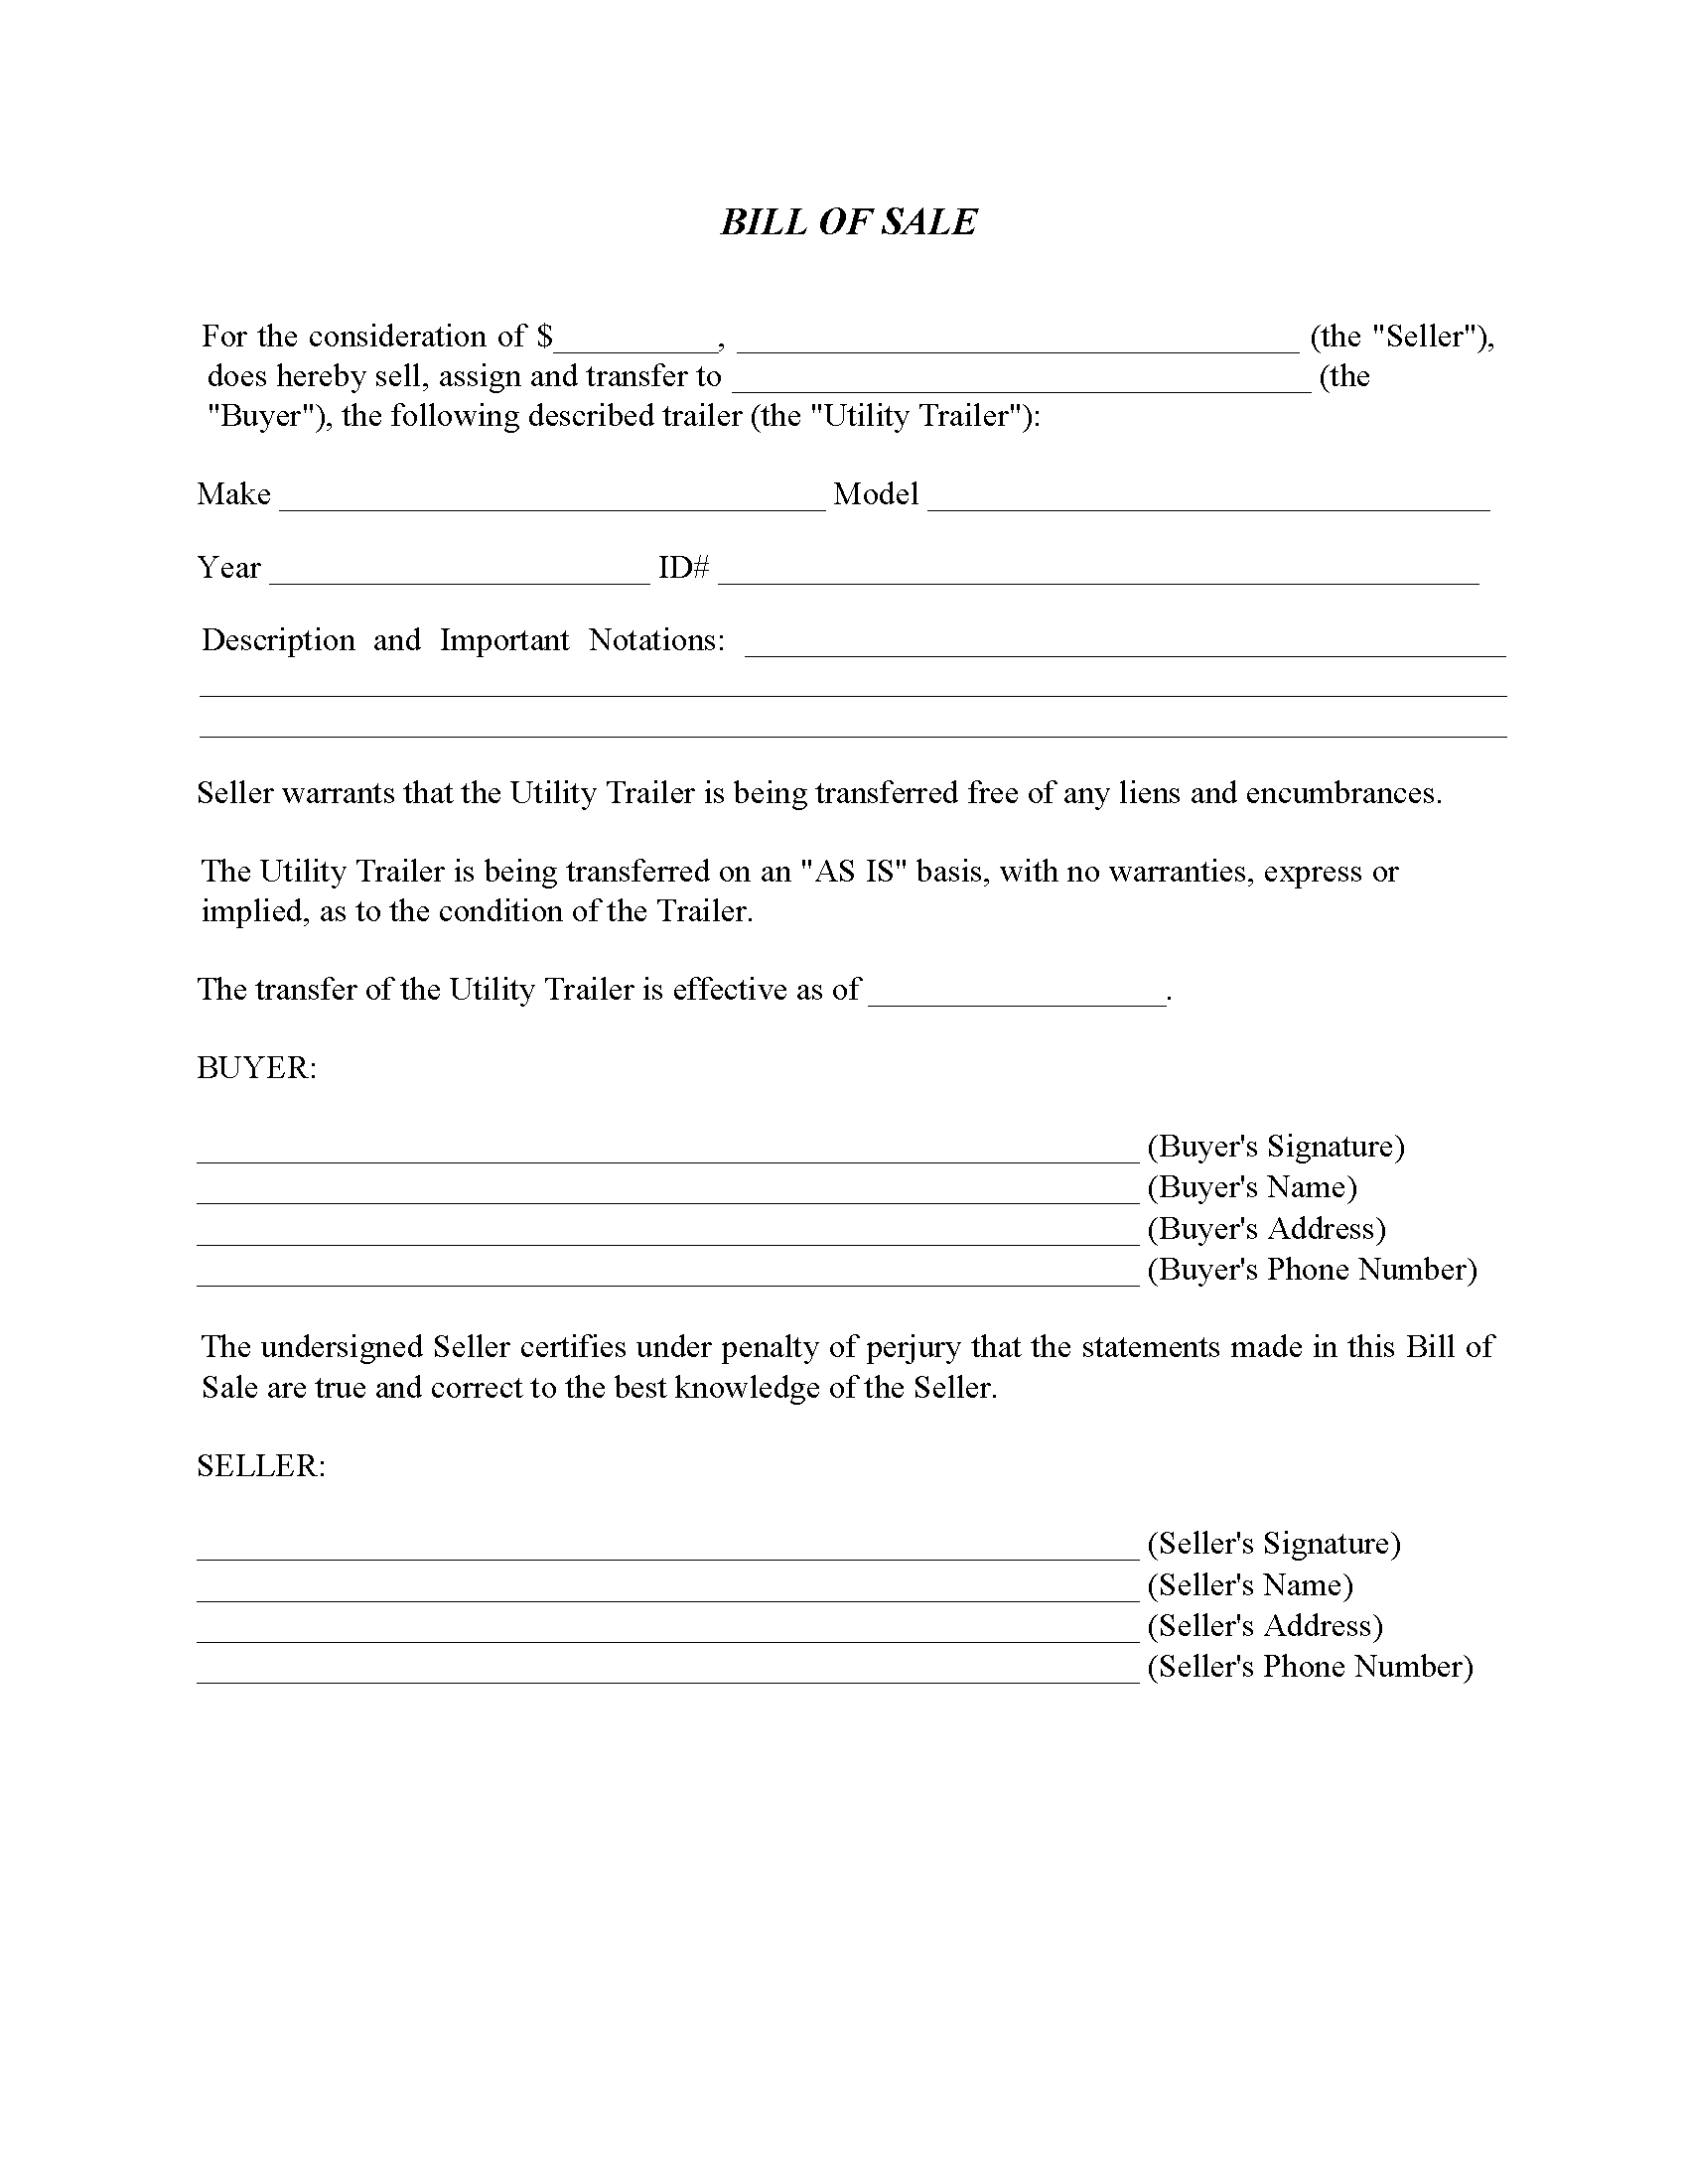 Utility Trailer Bill Of Sale Form Fillable Pdf Free Printable Legal